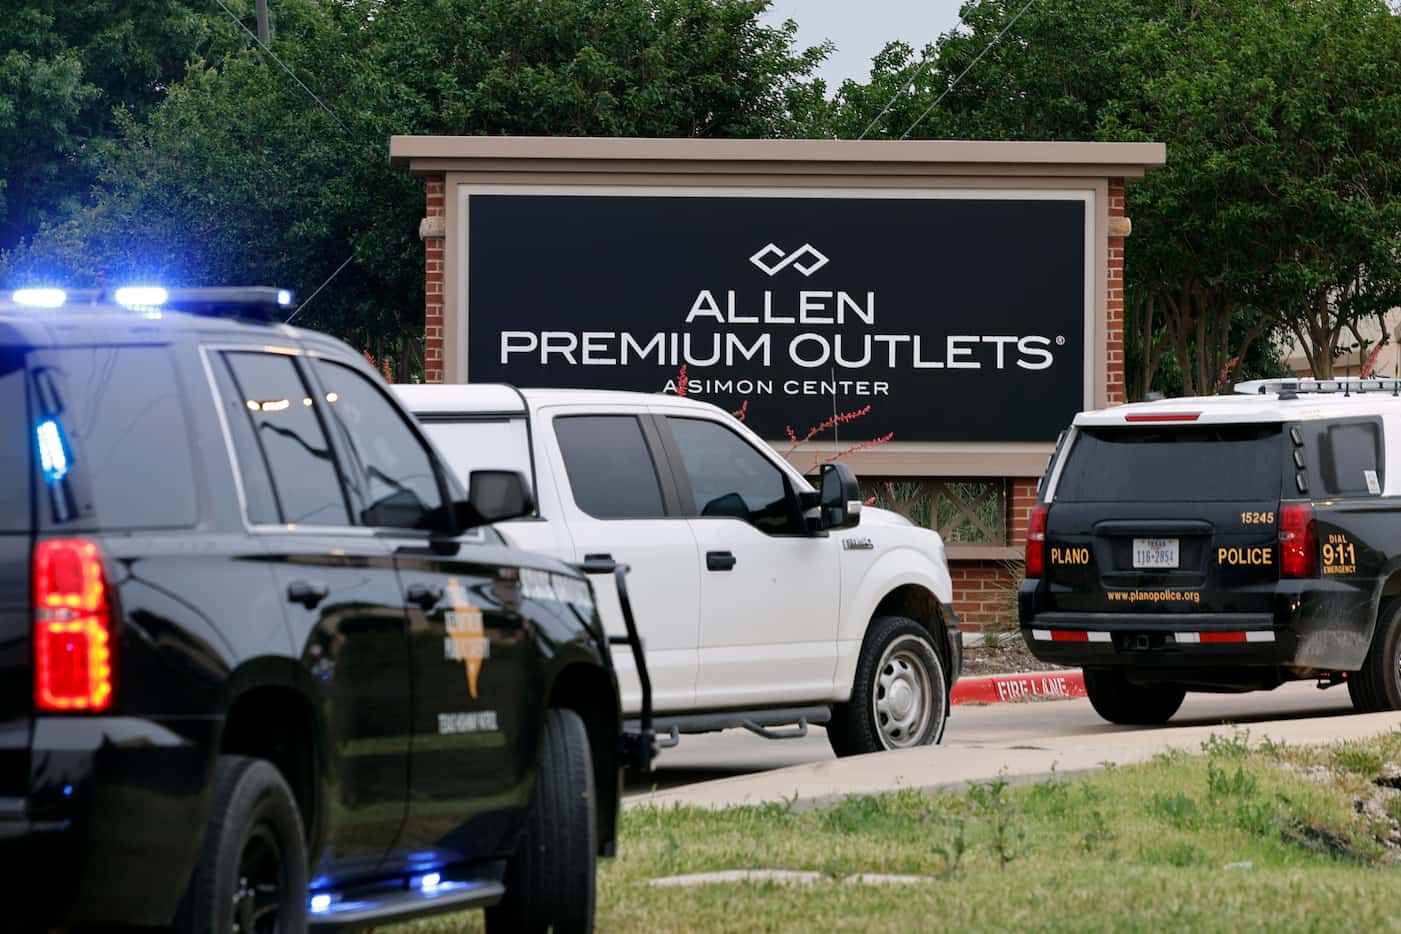 Law enforcement responds to the scene after a mass shooting at the Allen Premium Outlets in...